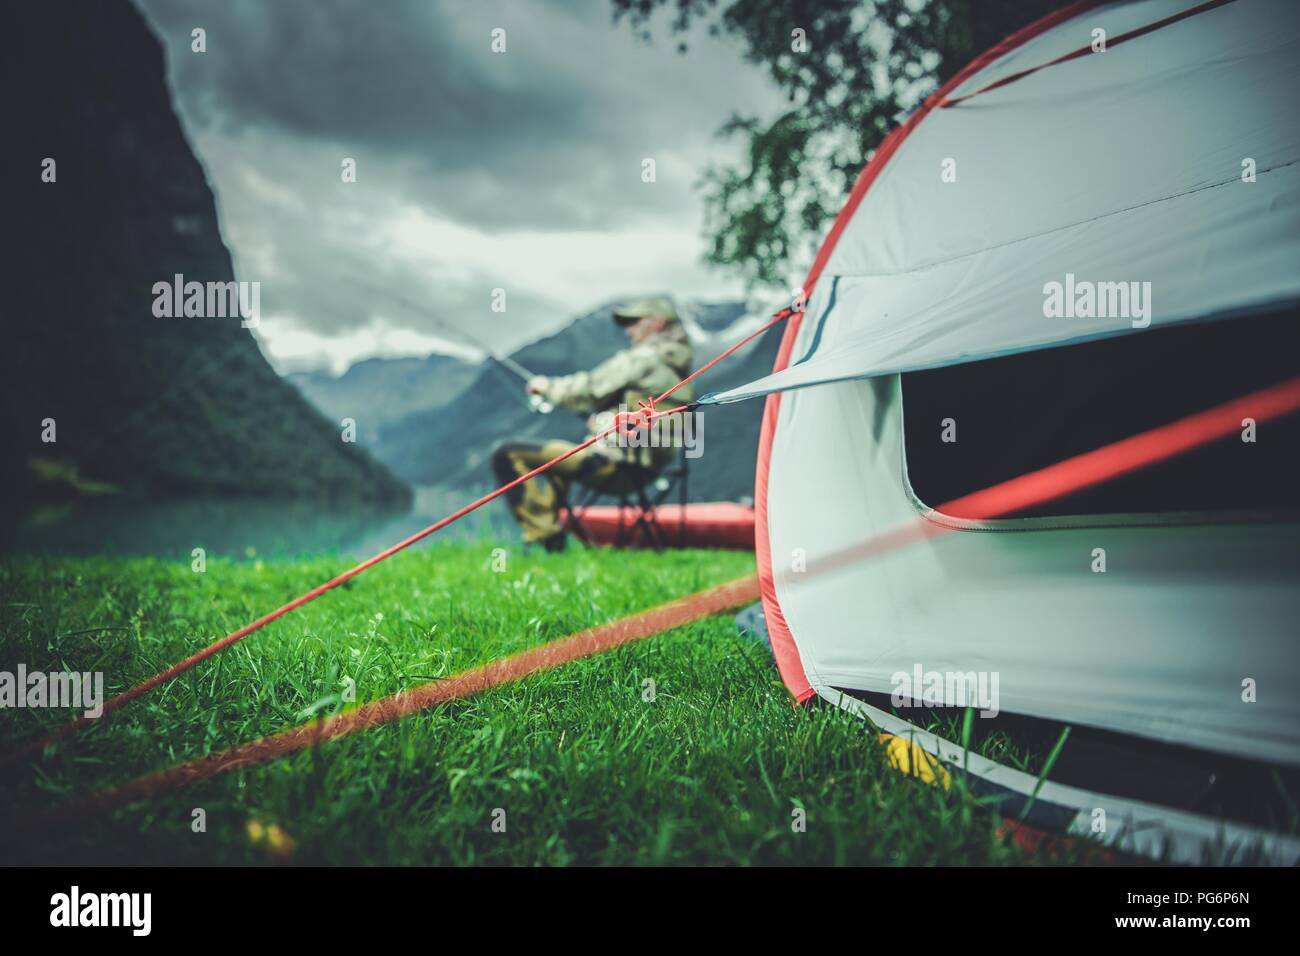 Fly Fishing Camping Time. Fisherman and His Tent on a Campsite. Stock Photo